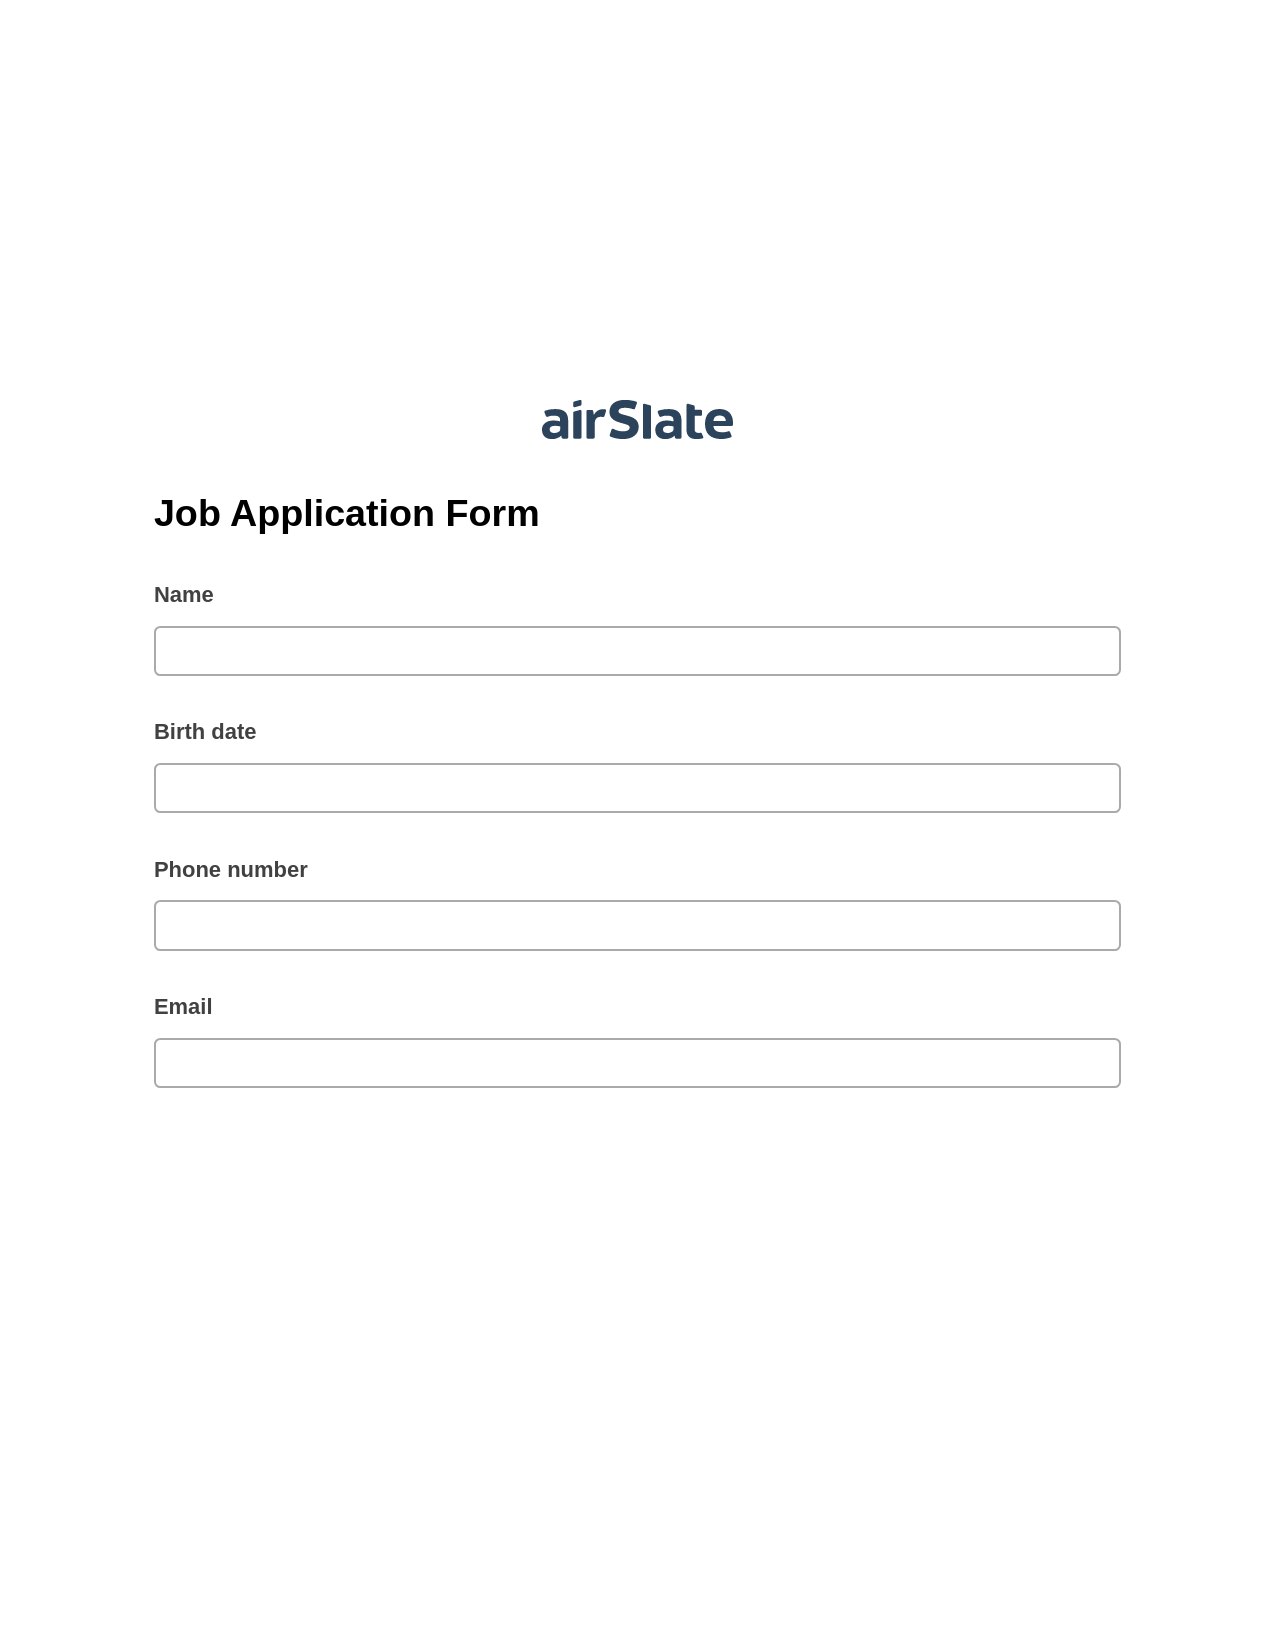 Job Application Form Pre-fill Document Bot, Create MS Dynamics 365 Records Bot, Email Notification Postfinish Bot